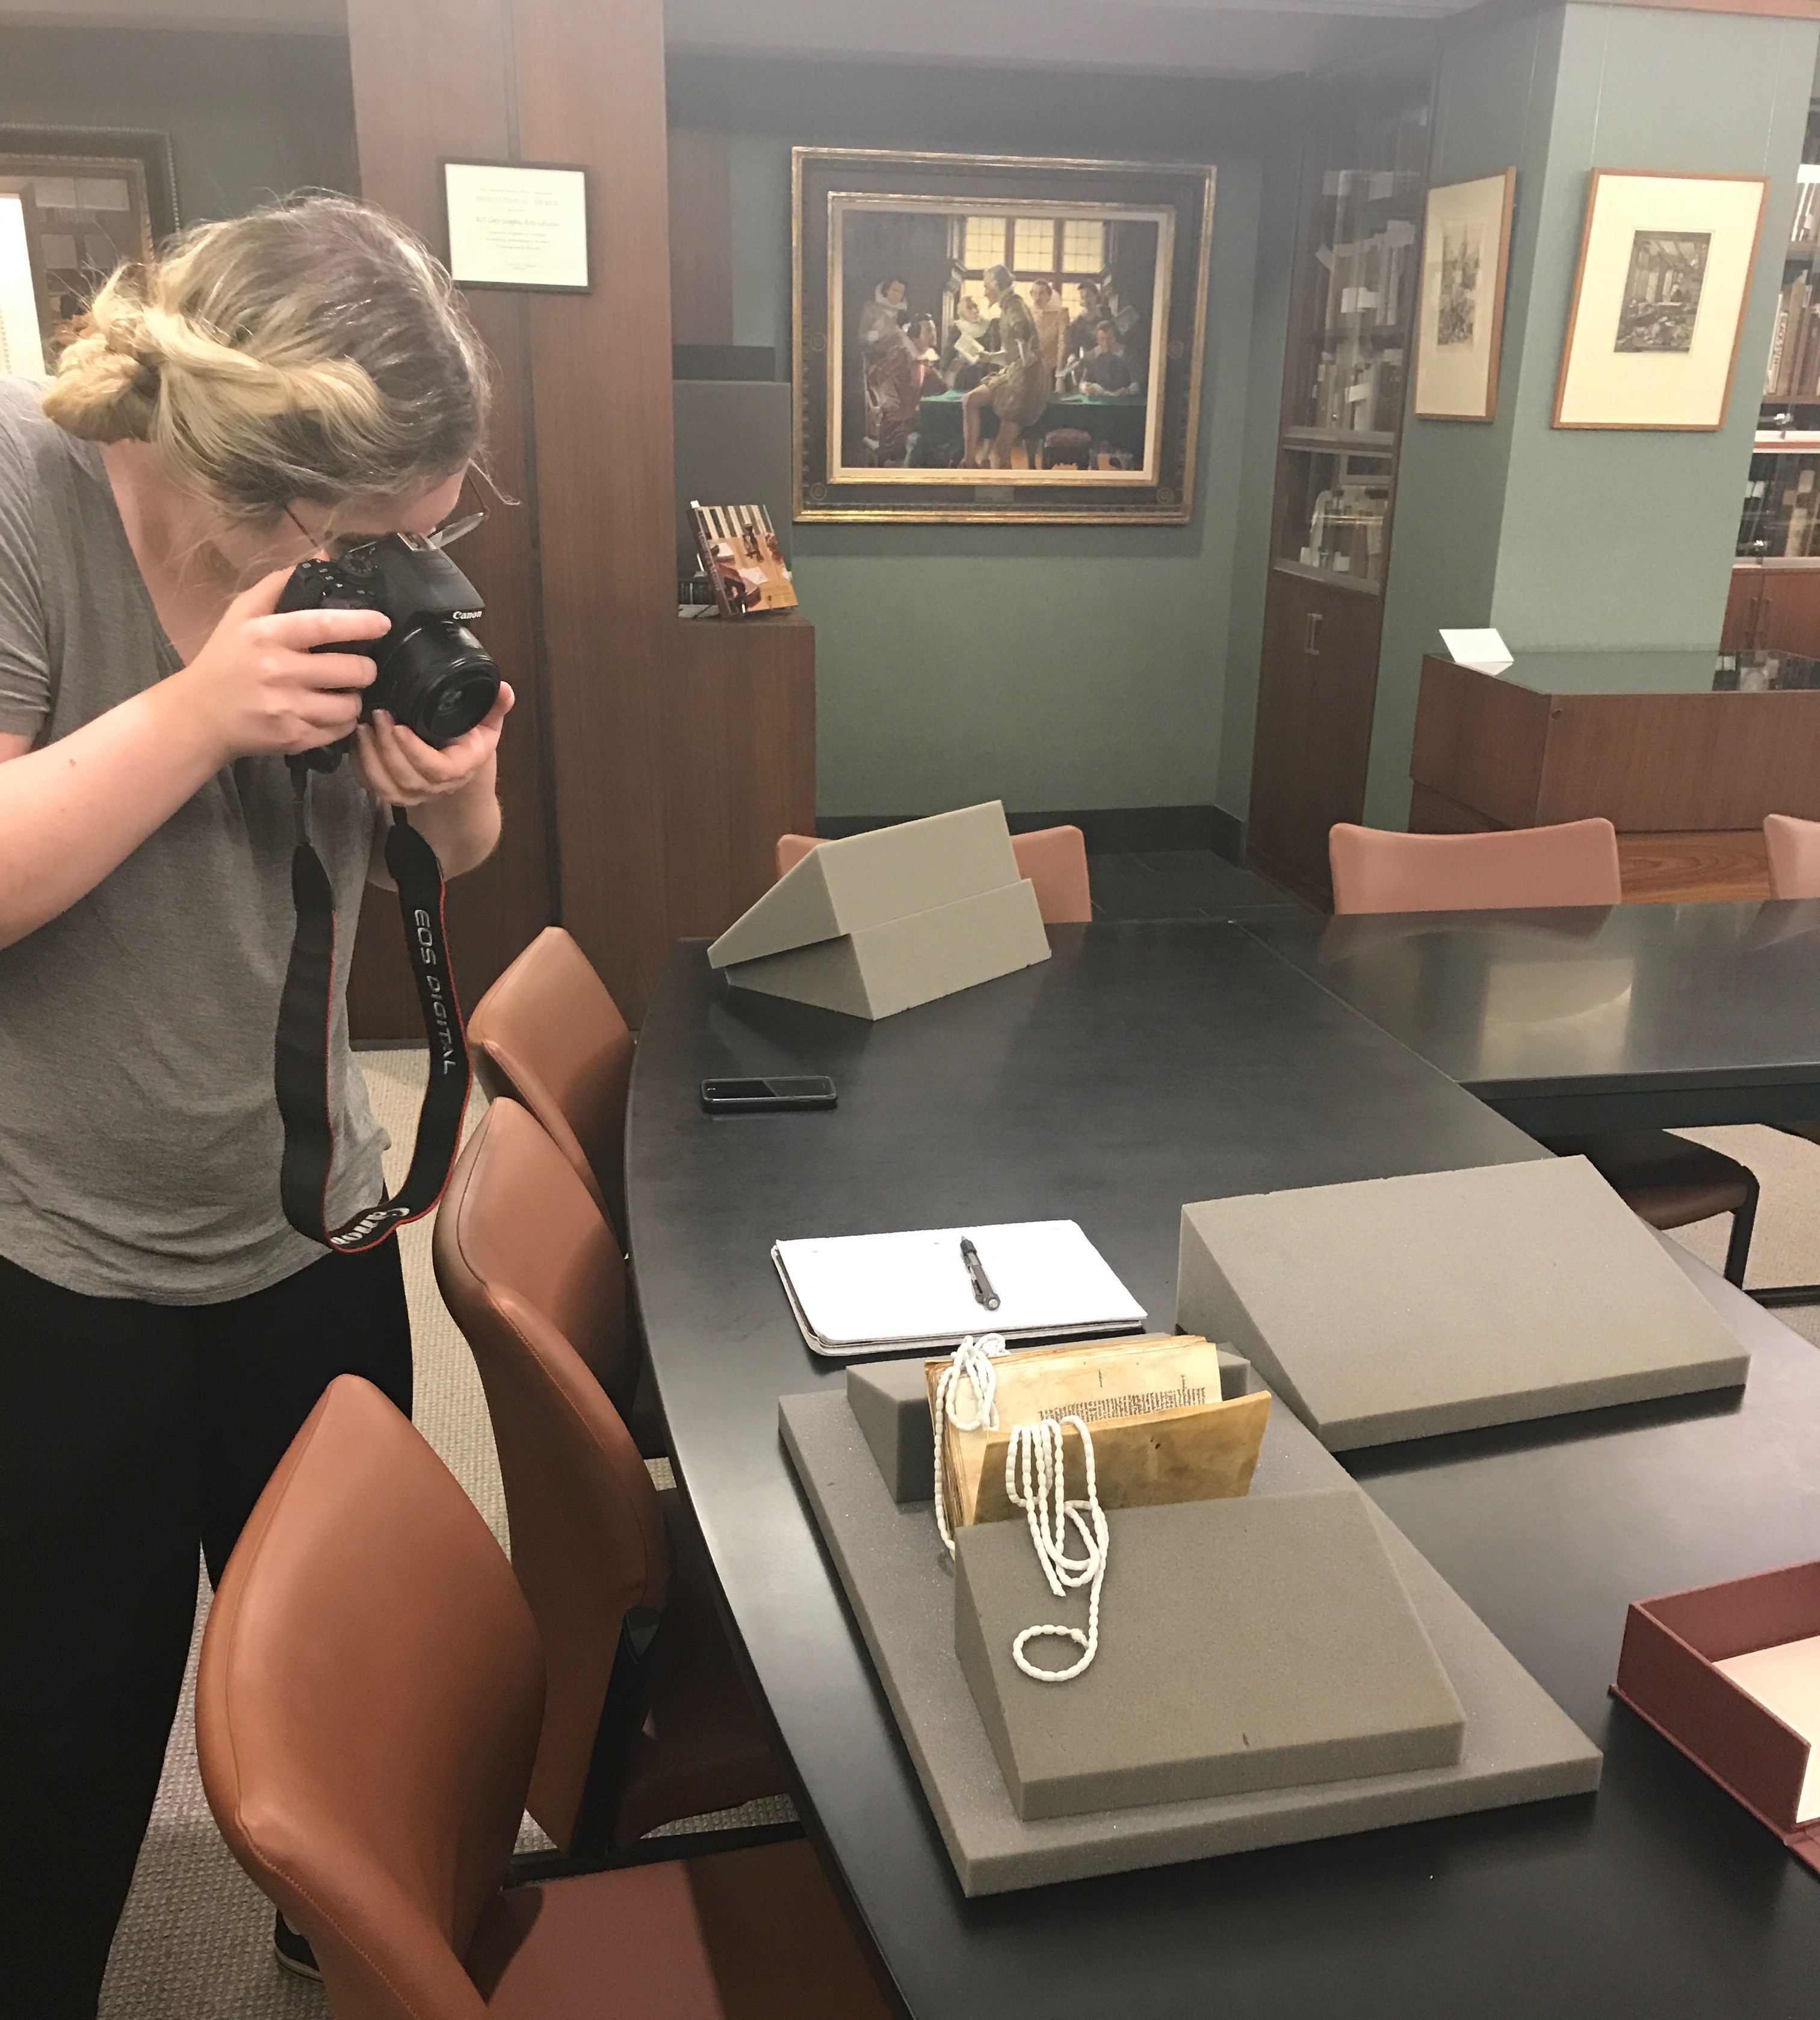 Student takes photo of book